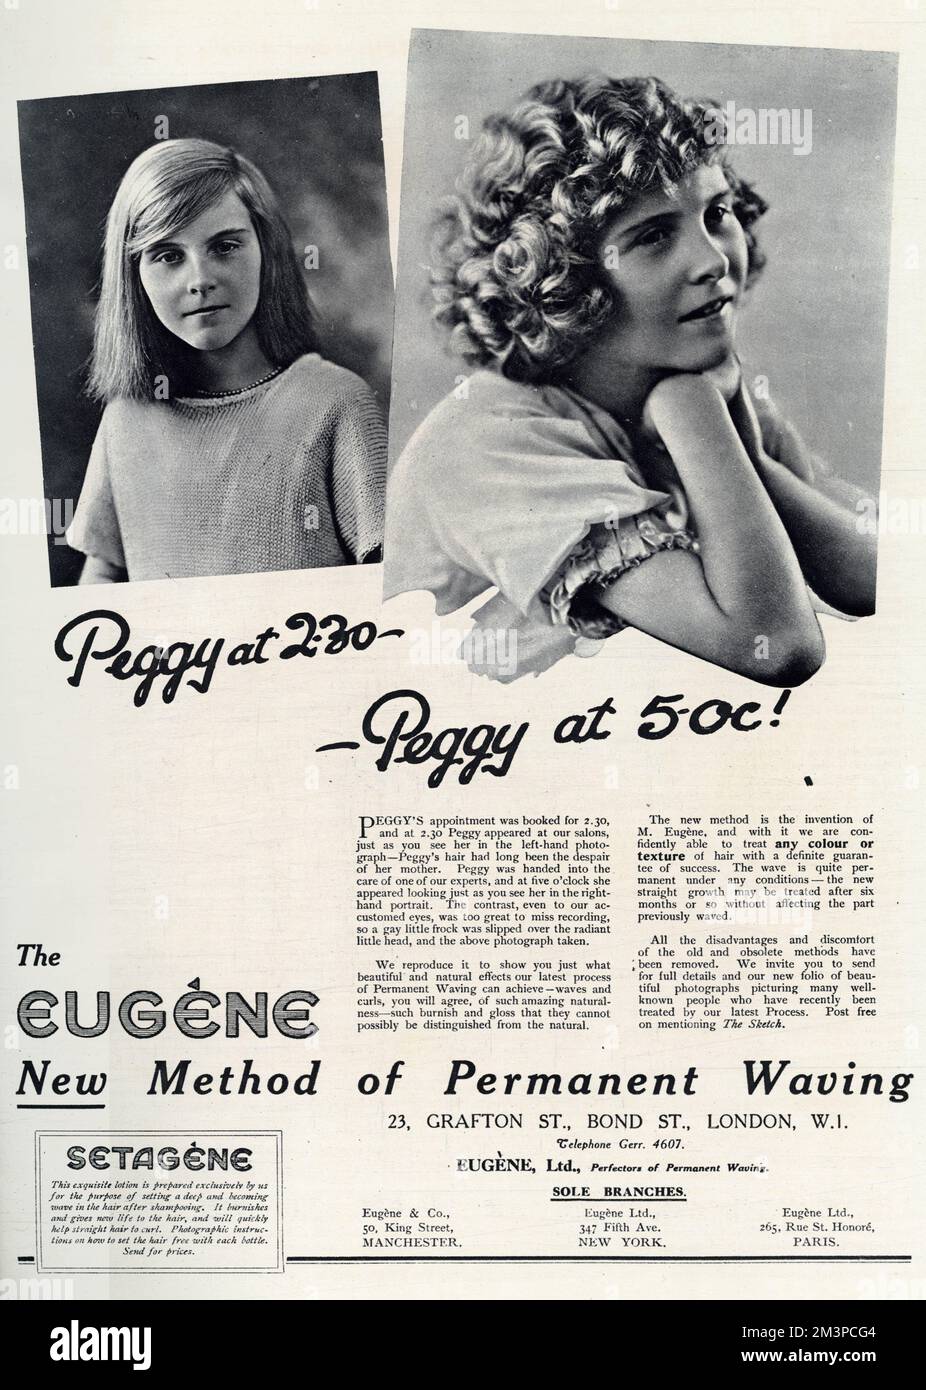 Peggy appeared at our salons, just as you see her in the left-hand photograph, Peggy's hair had been the despair of her mother!  Peggy was handed into the care of one of our experts, and at five o'clock she appeared looking just as you see her in the right-hand photograph!  1922 Stock Photo